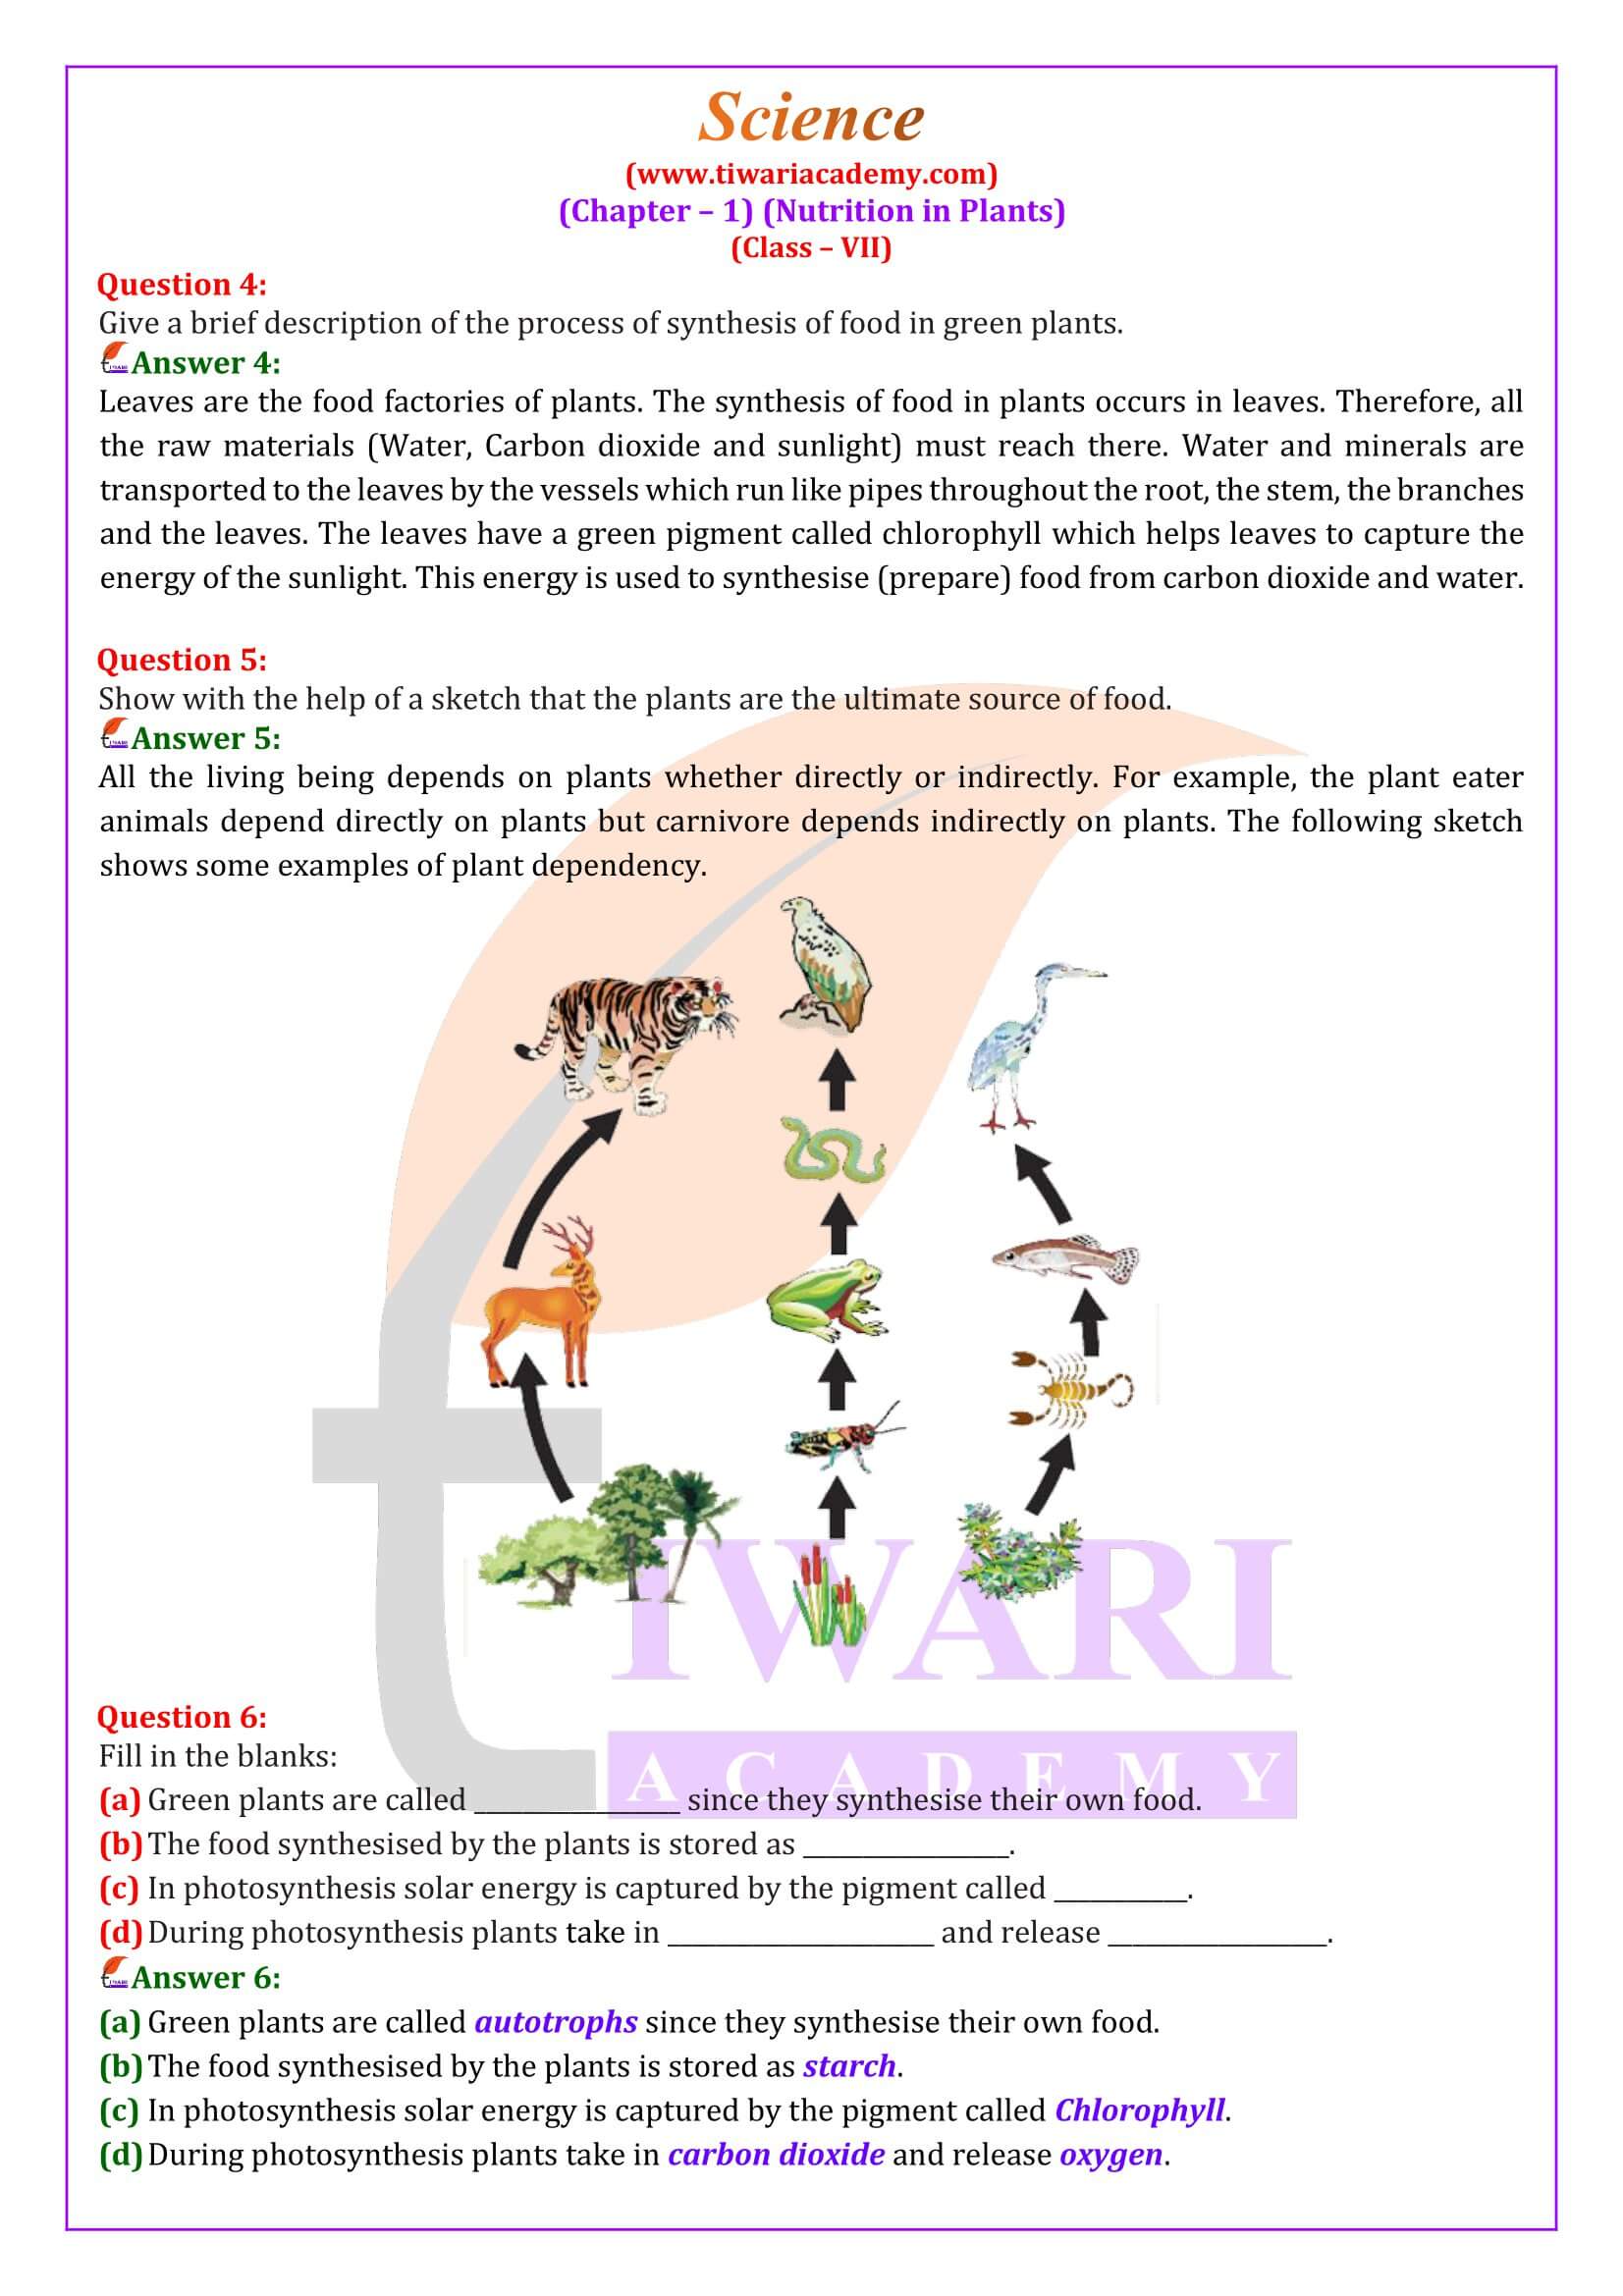 NCERT Solutions for Class 7 Science Chapter 1